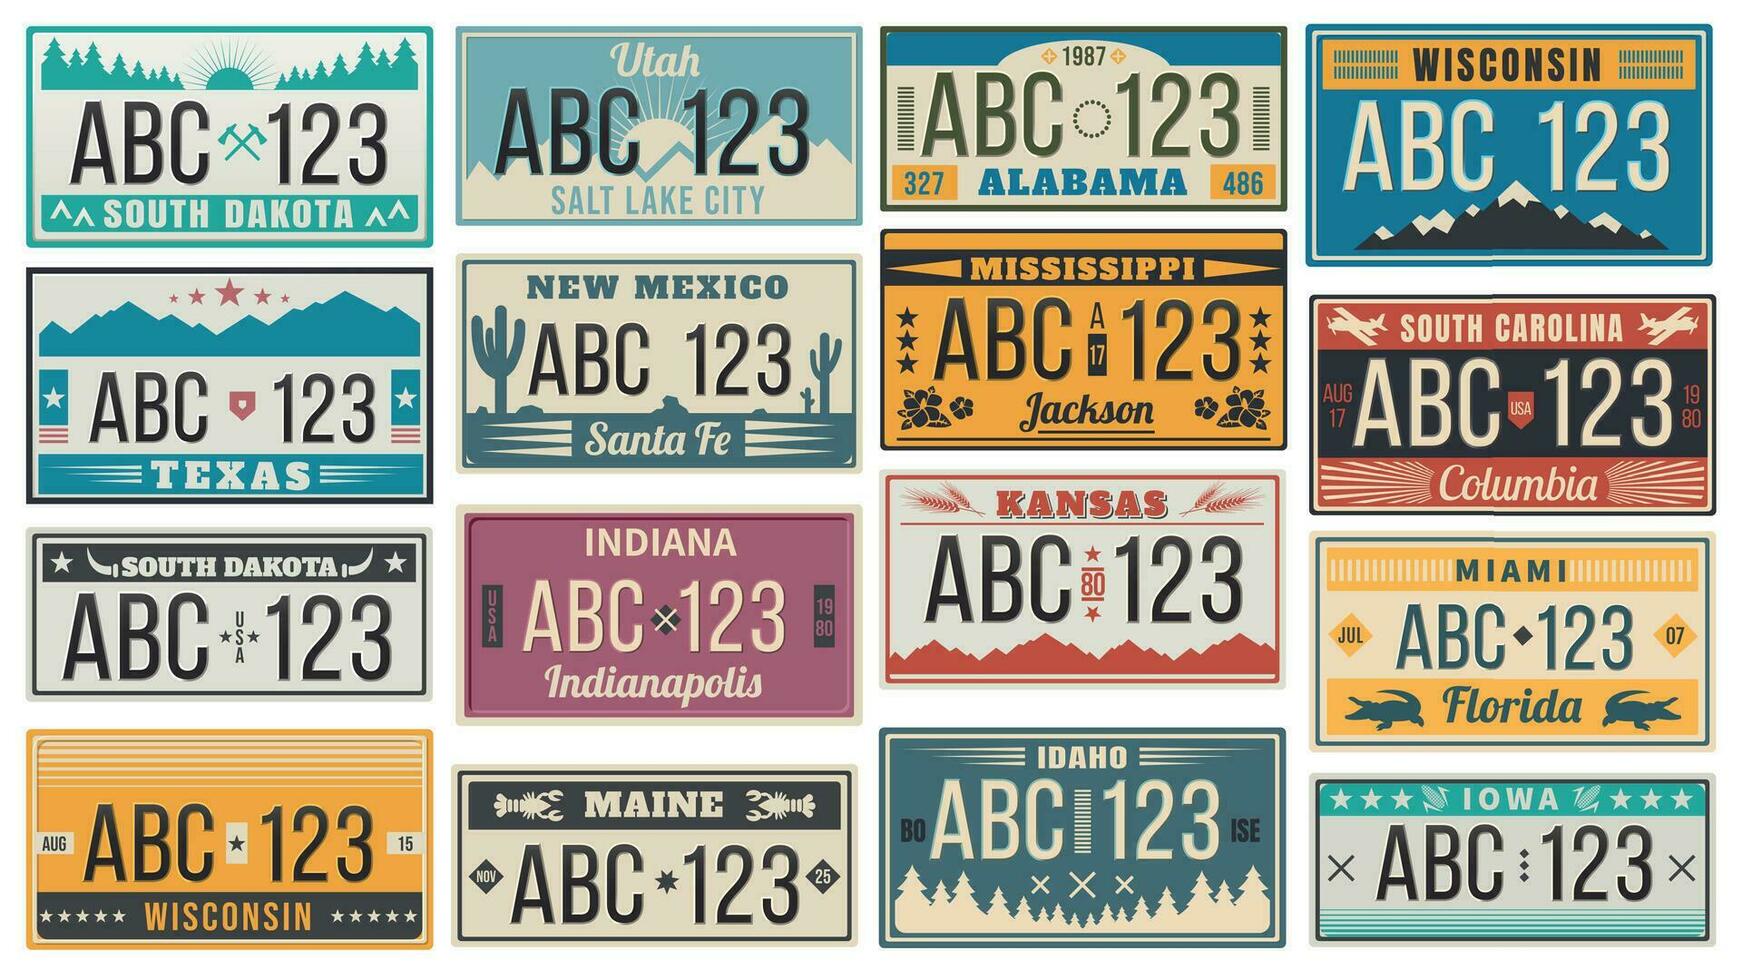 Car number license plate. Retro USA cars registration number signs, Texas, Wisconsin and Kansas license plates vector illustration set